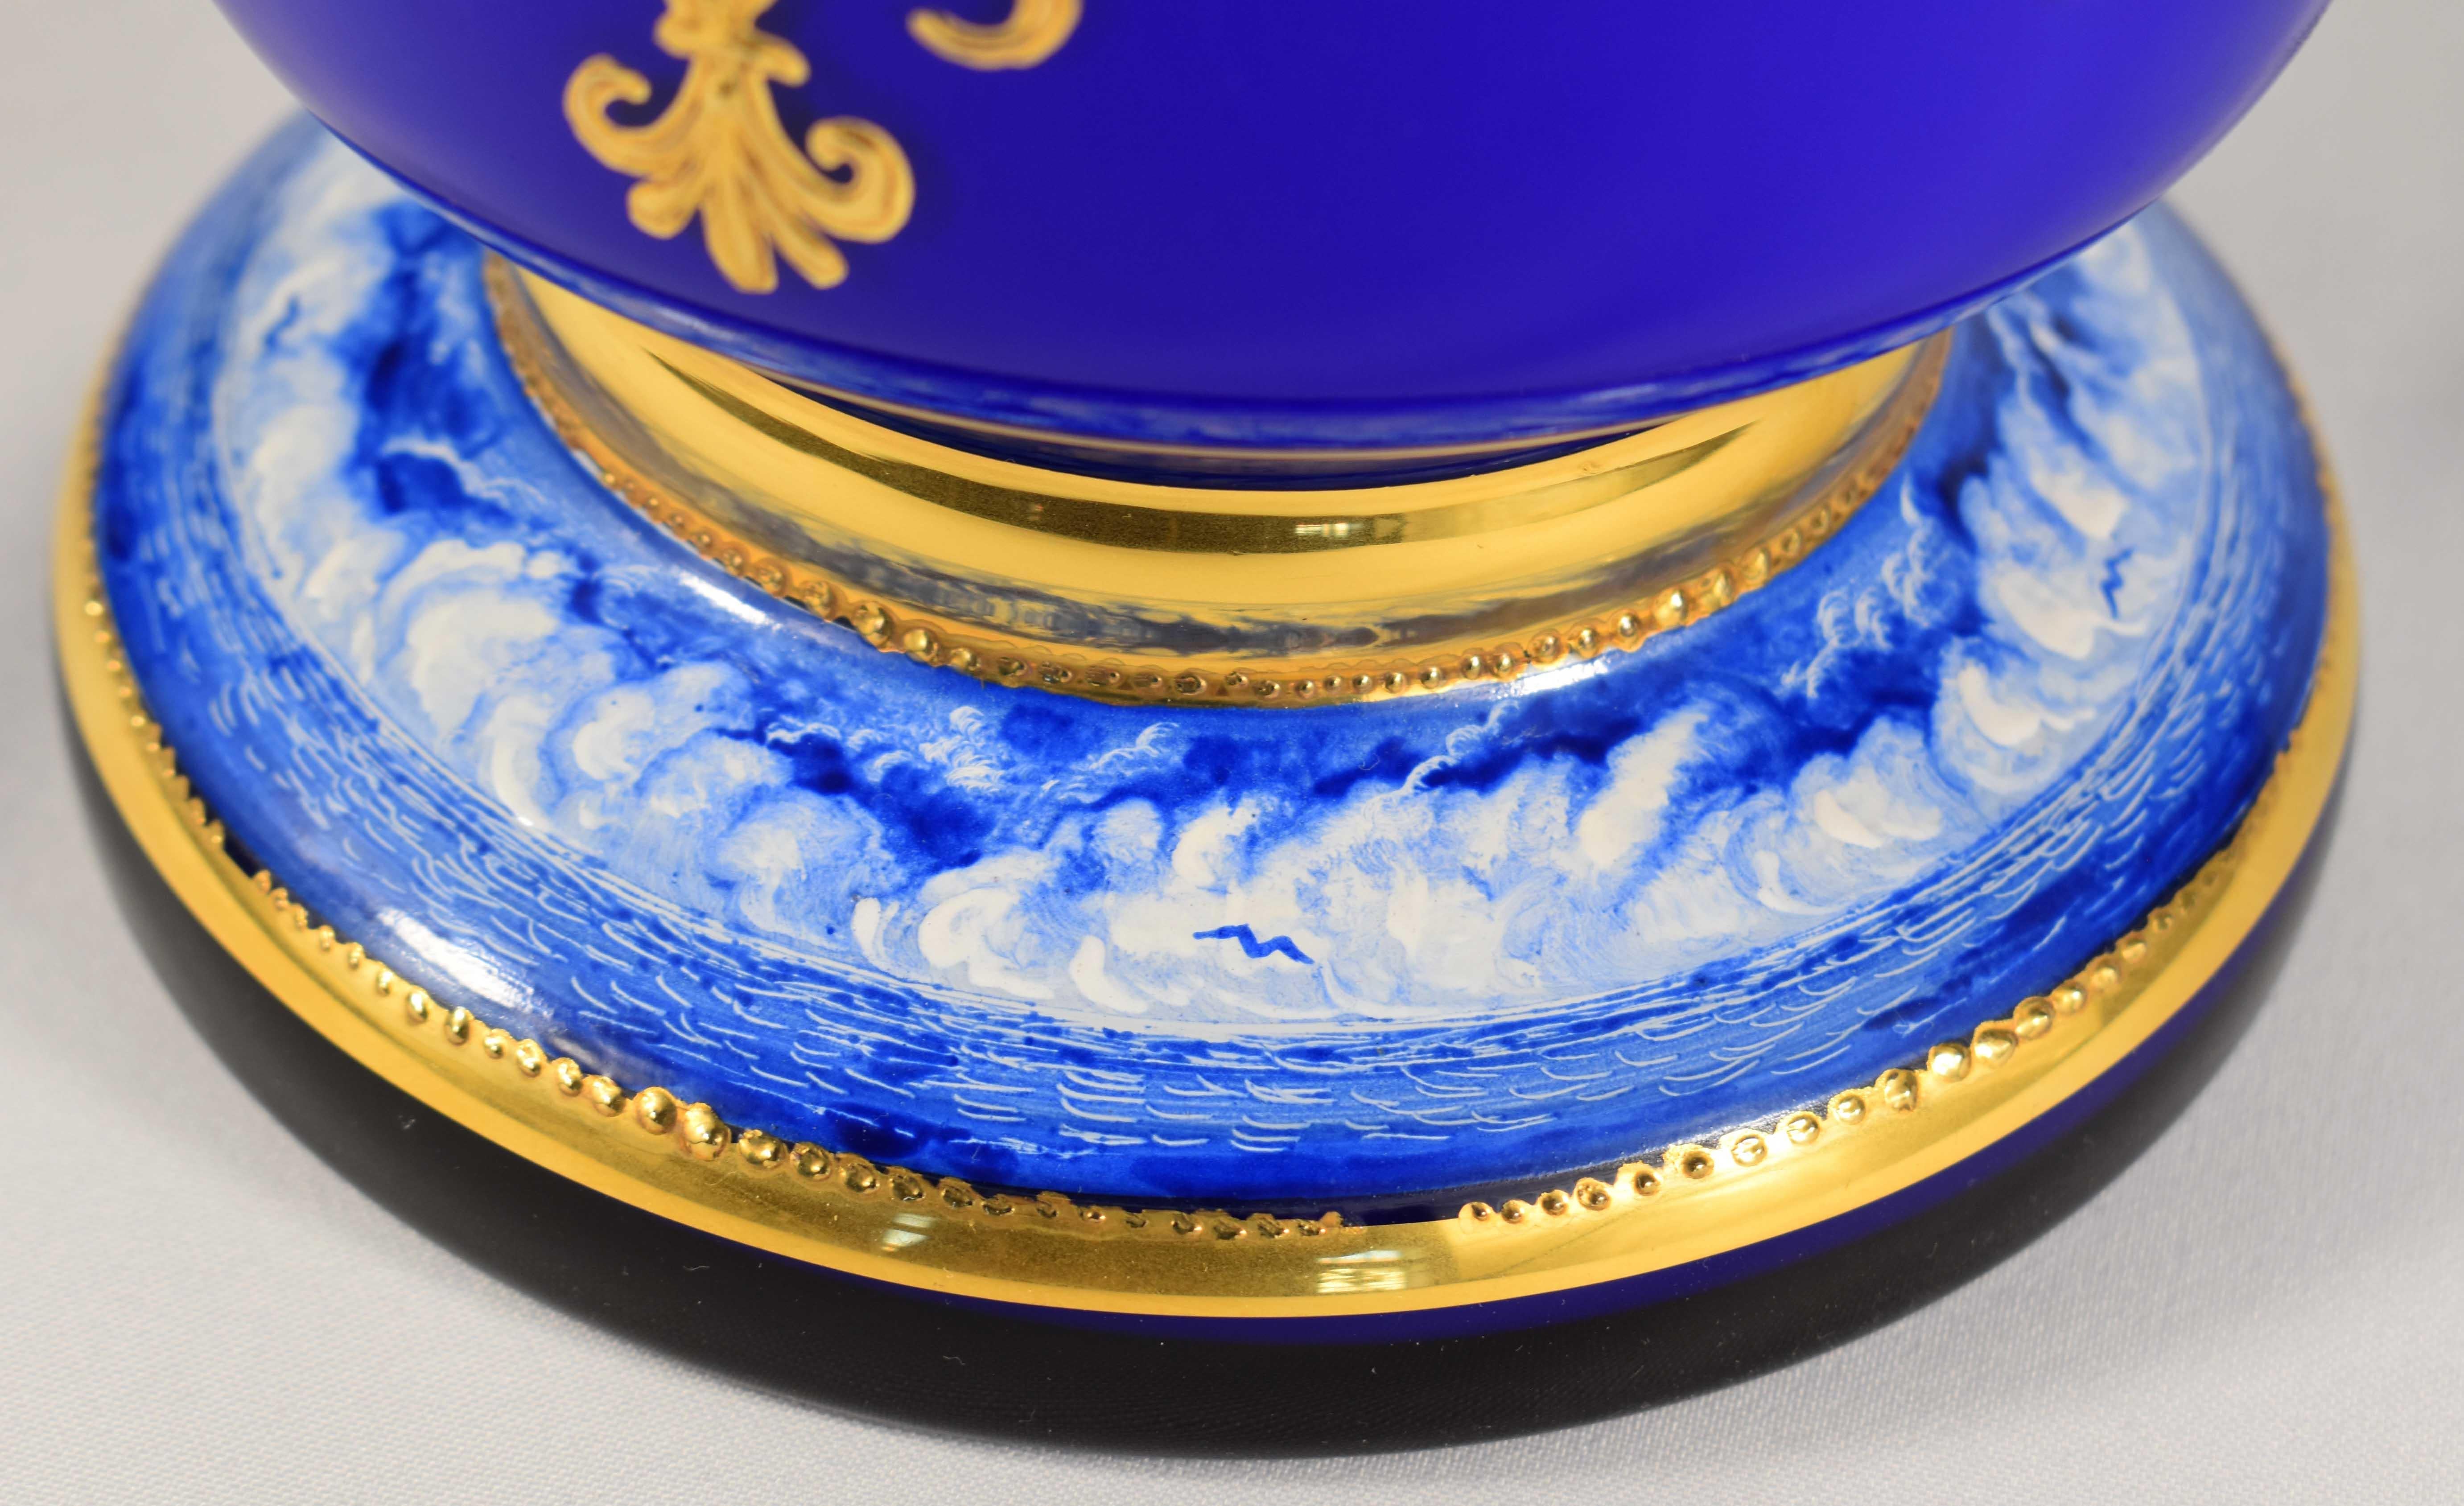 Large Opal Vase Overlay Blue Cobalt Glass, Painted Ships, Gilded, 20th Century For Sale 4